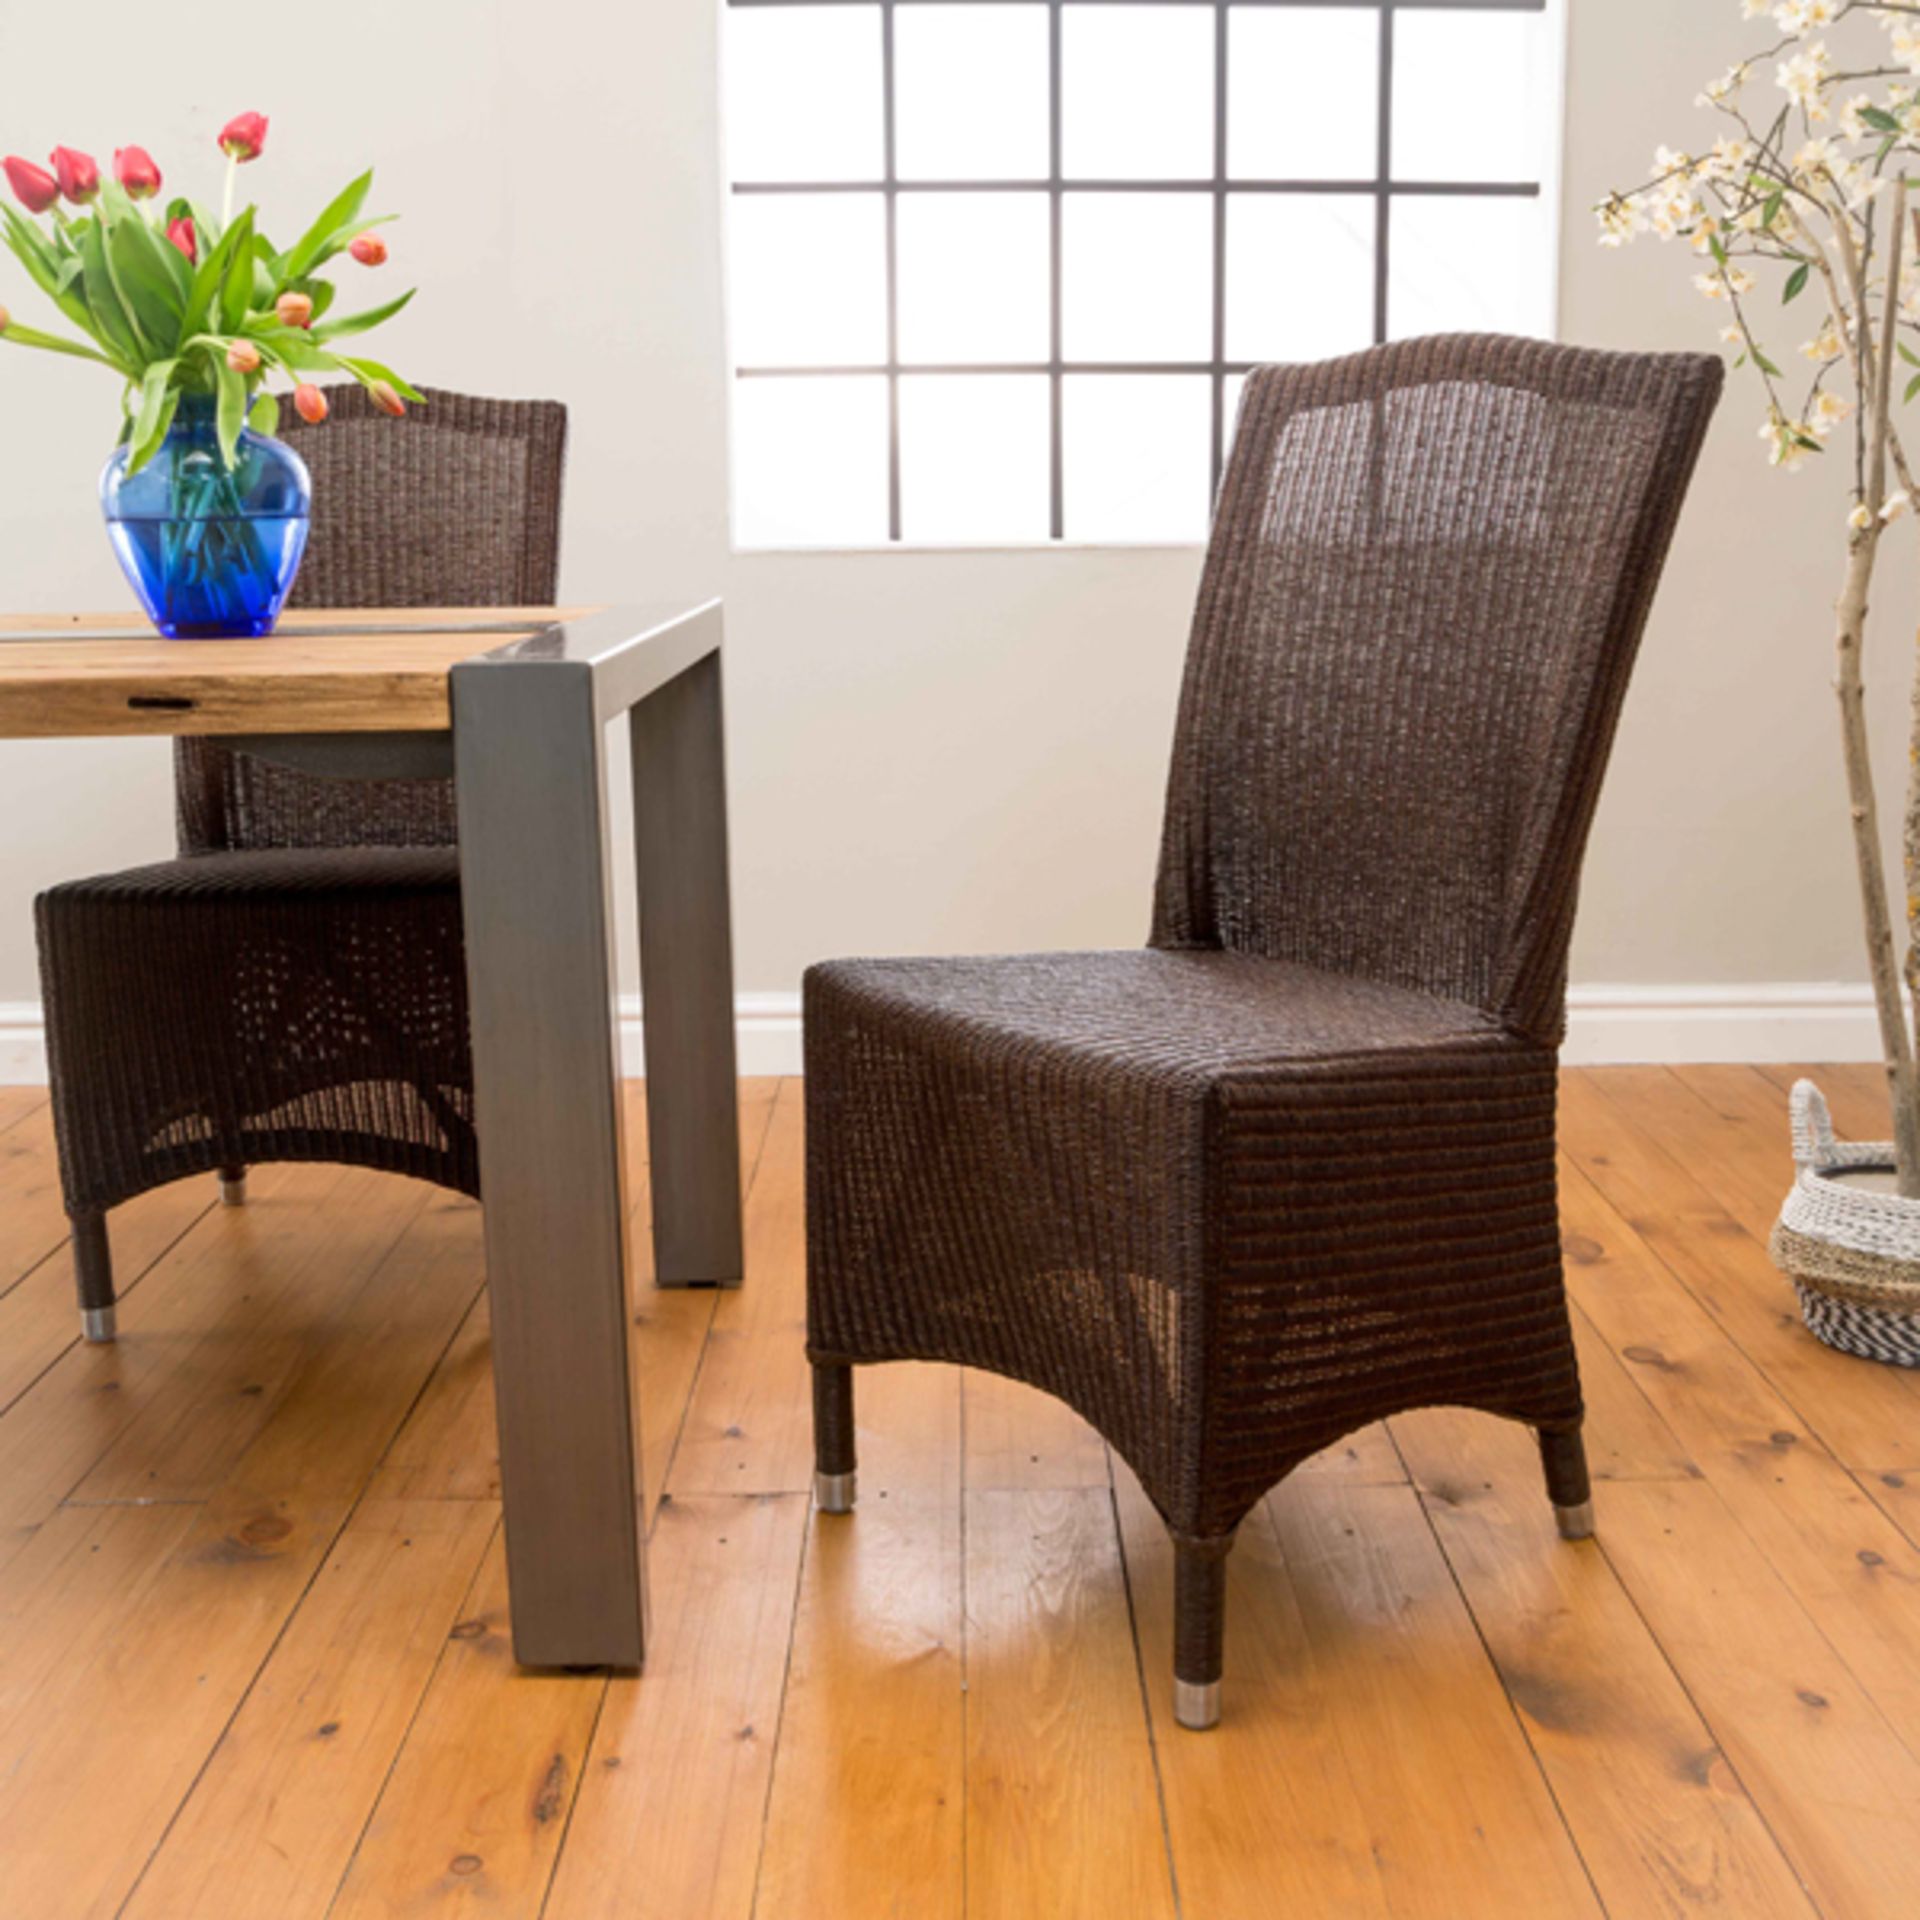 A Pair Of Classic Lloyd Loom Chairs Colonial Brown 40 X 60 X 100cm (Loc Oal01d) - Image 2 of 2